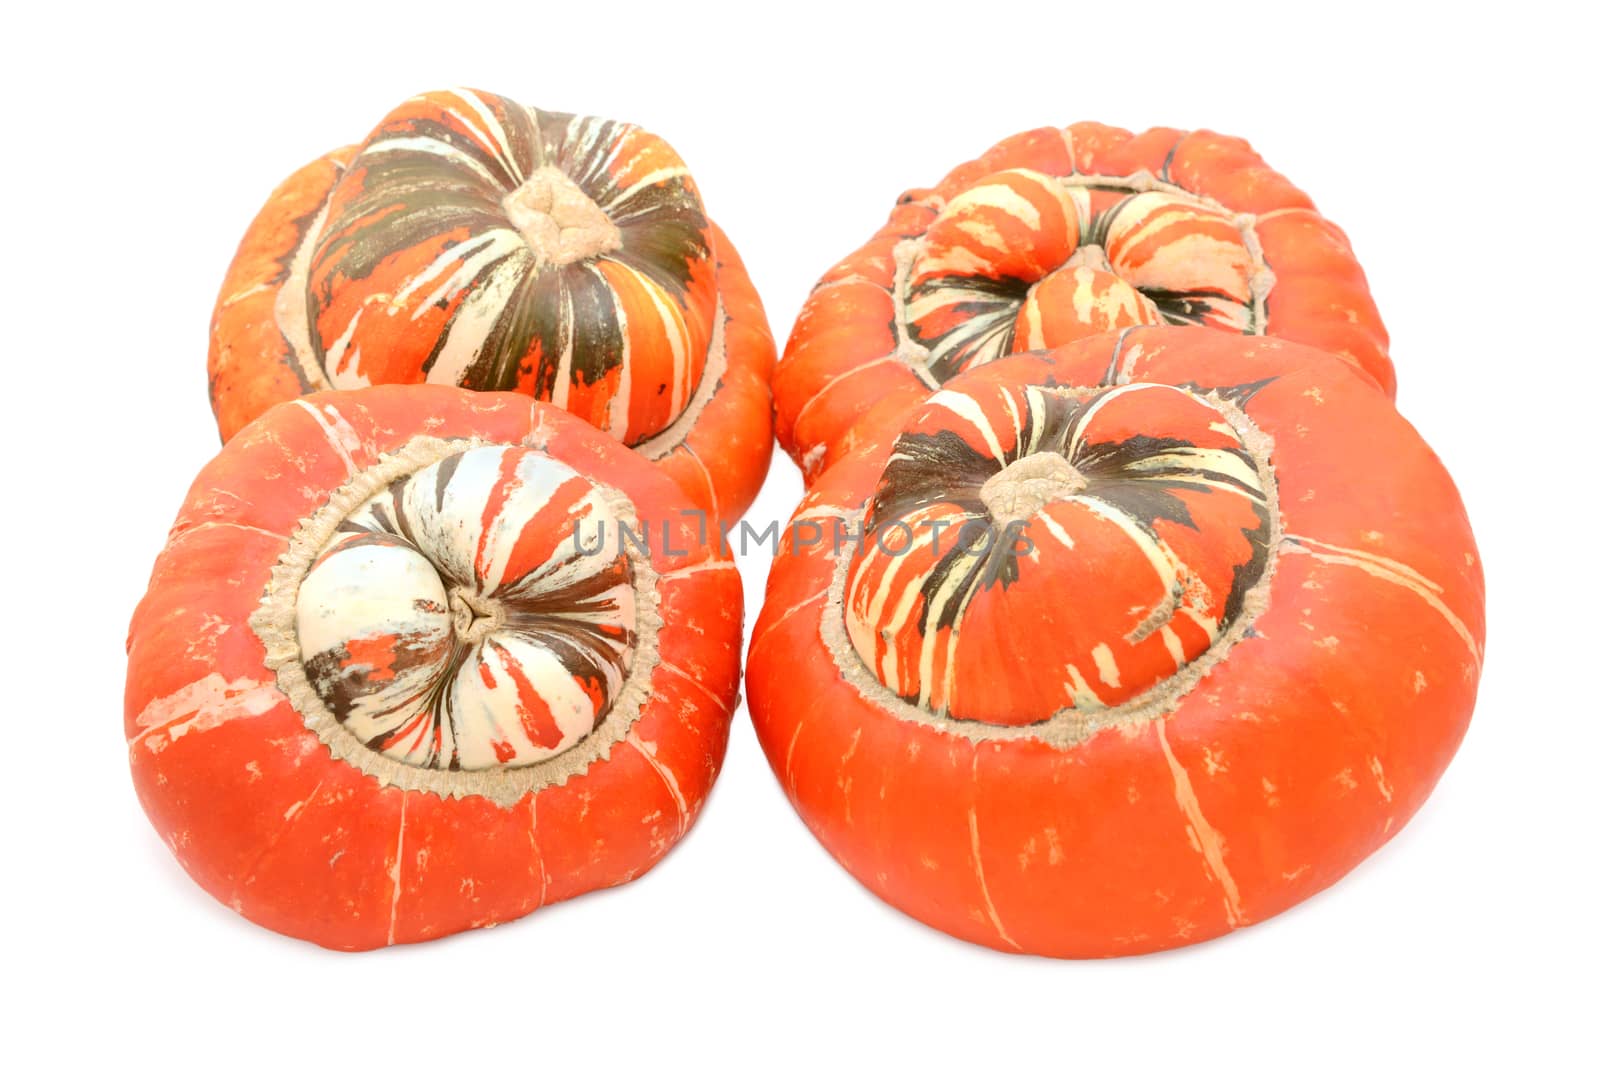 Four large Turks Turban ornamental gourds with orange caps and striped centres, on a white background